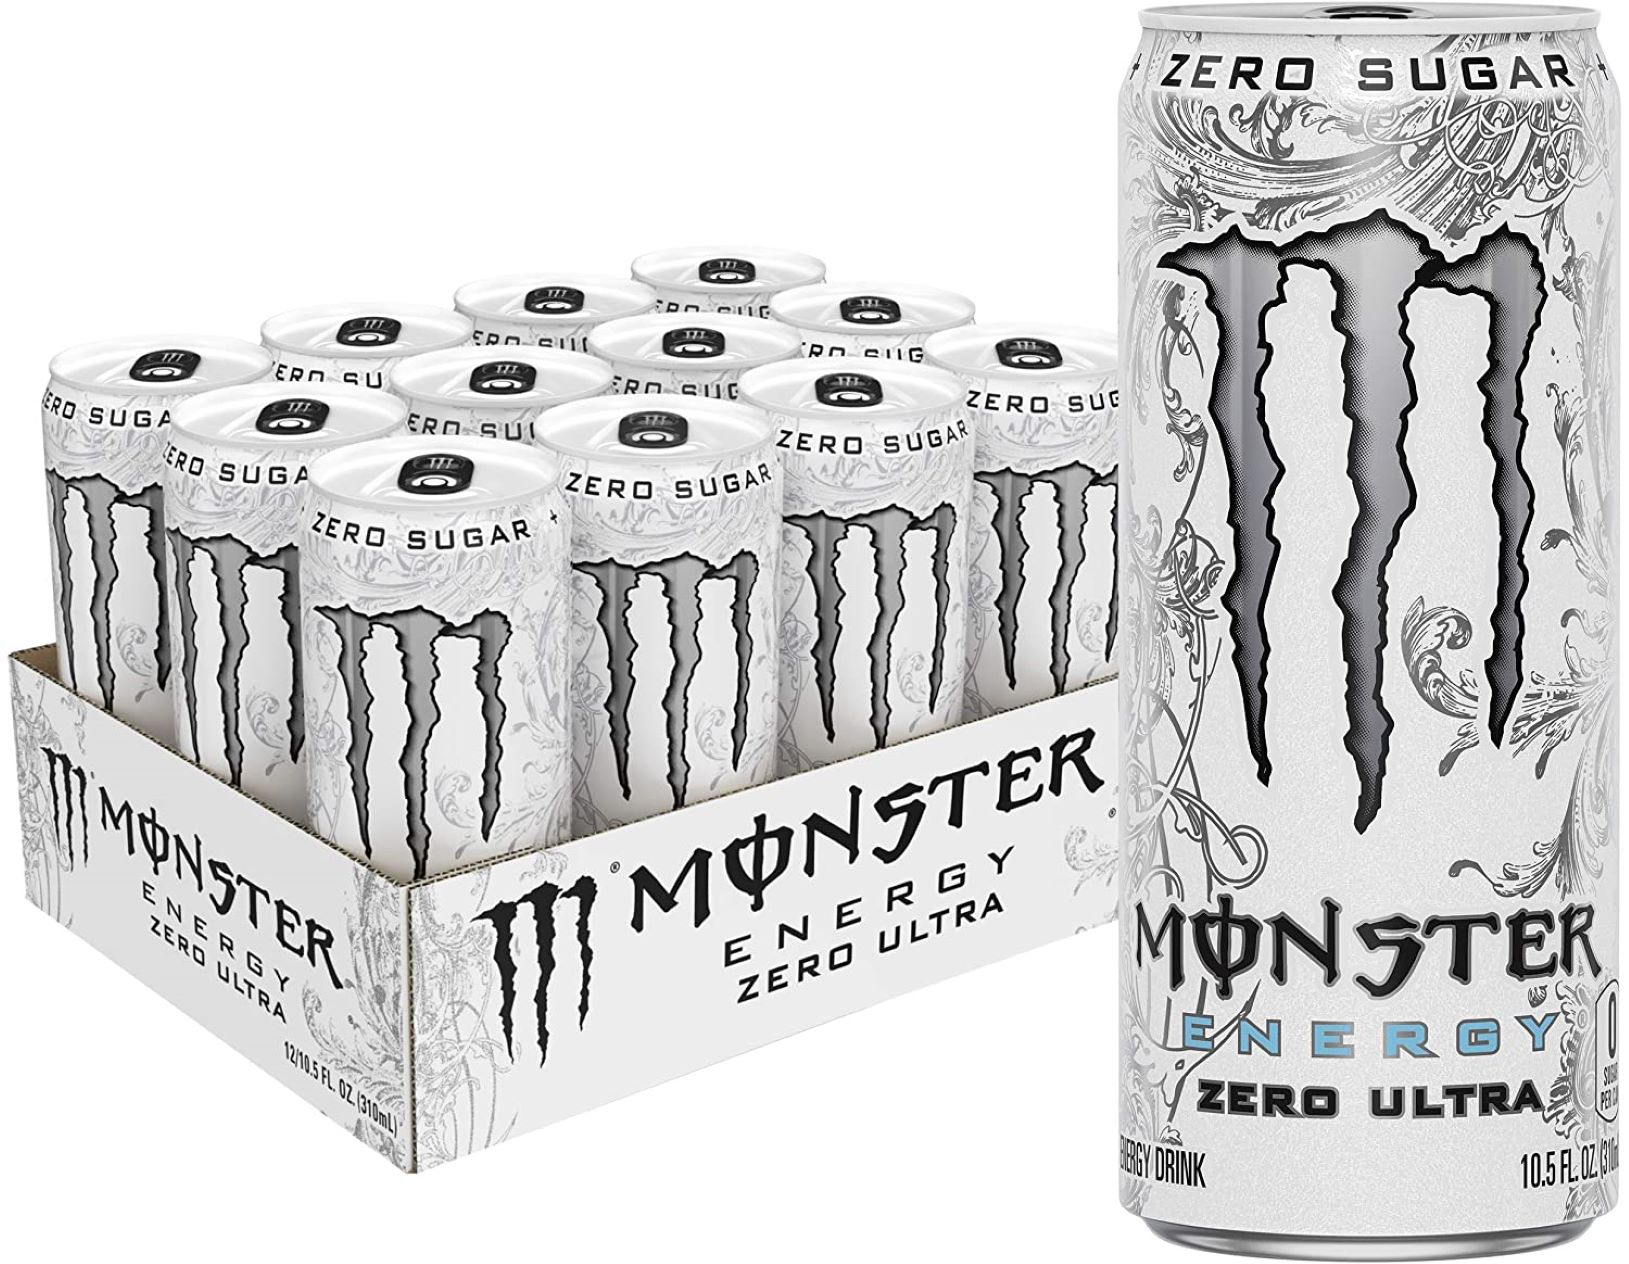 15-white-monster-energy-nutrition-facts